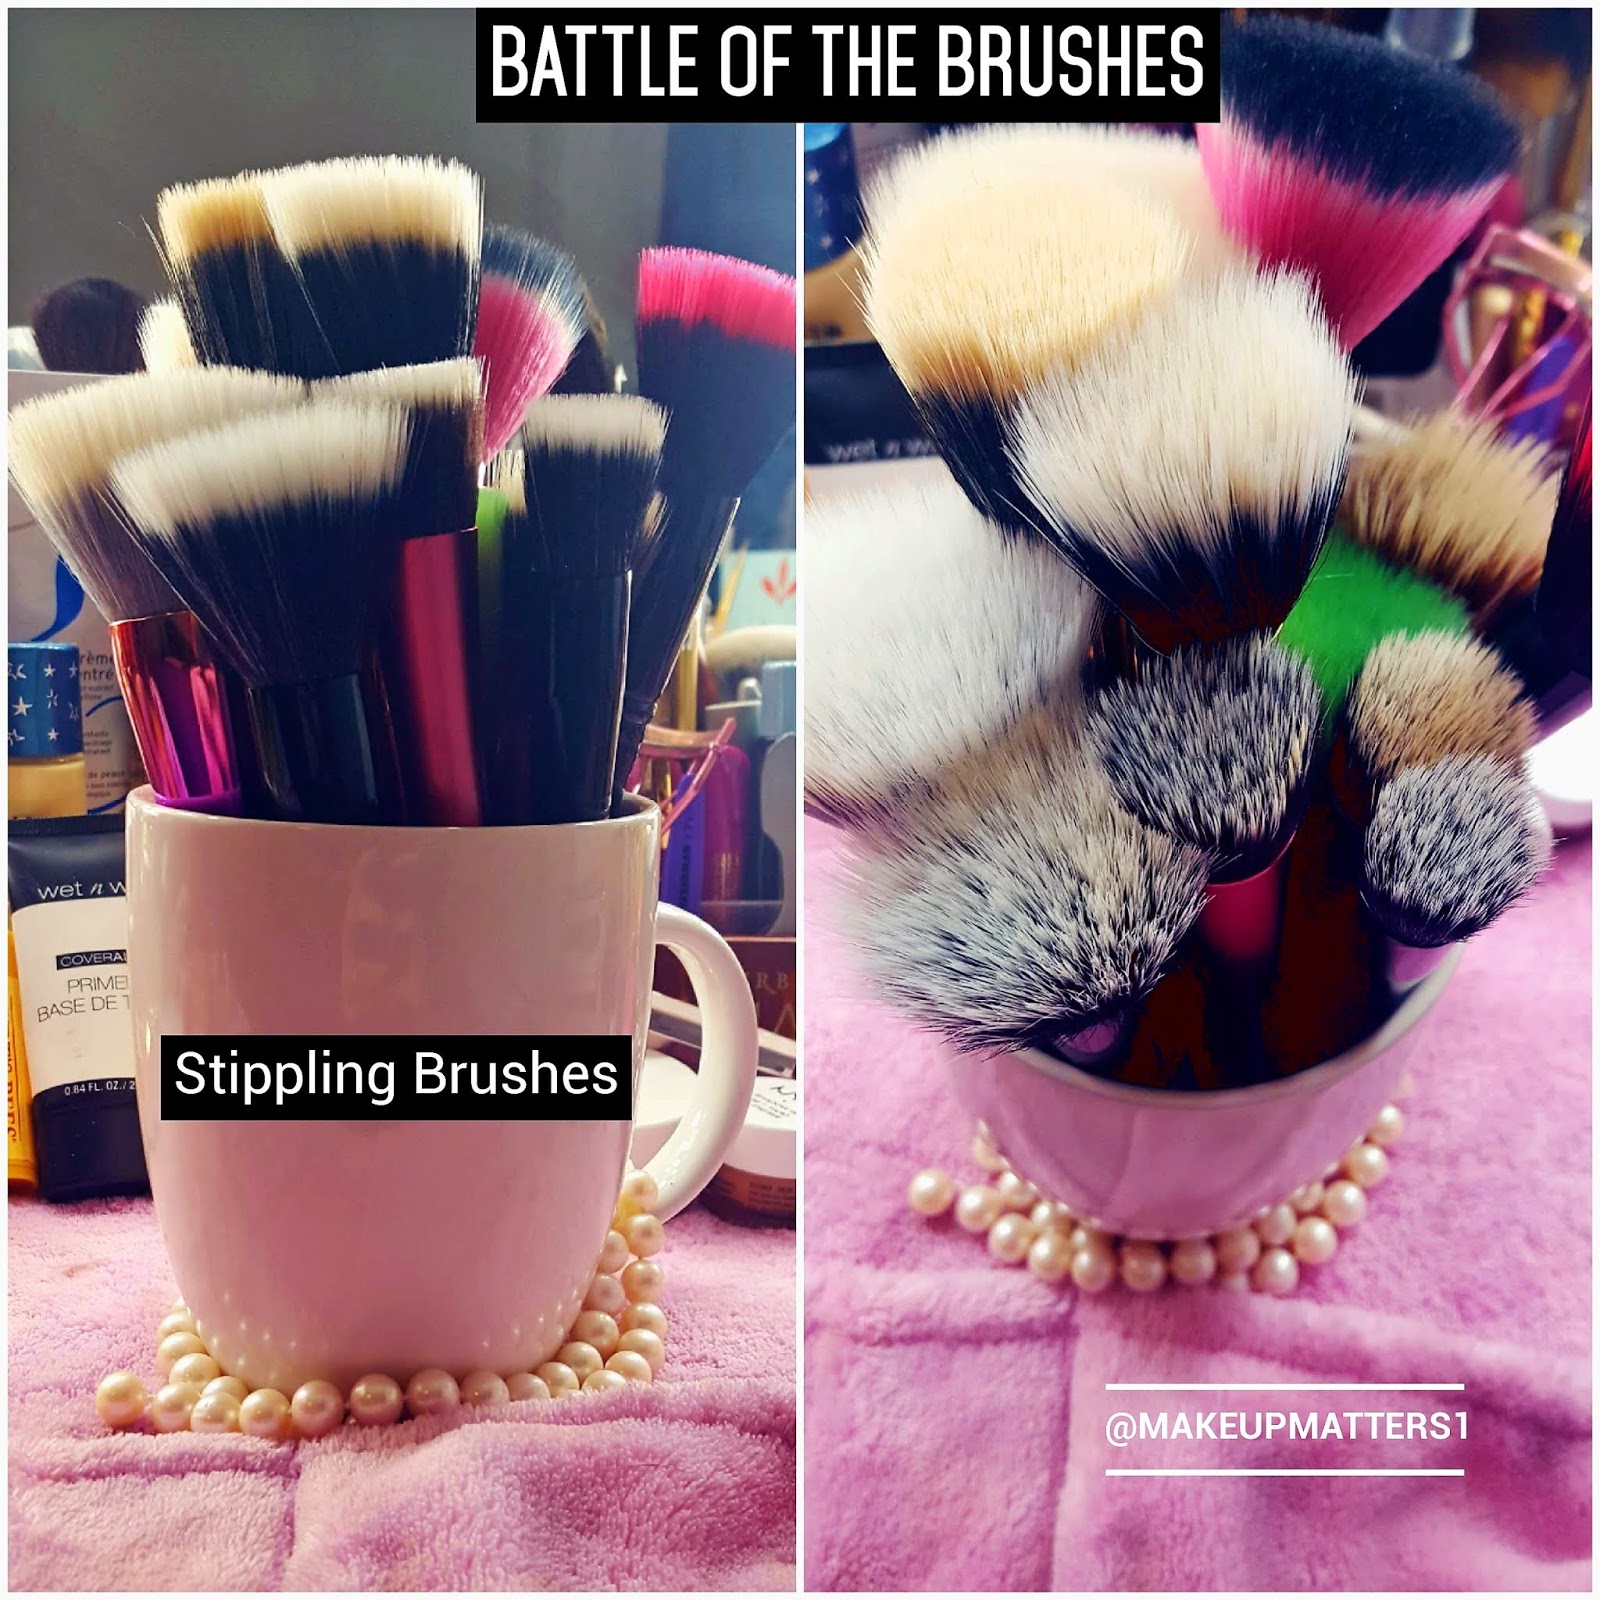 what is a stippling makeup brush used for